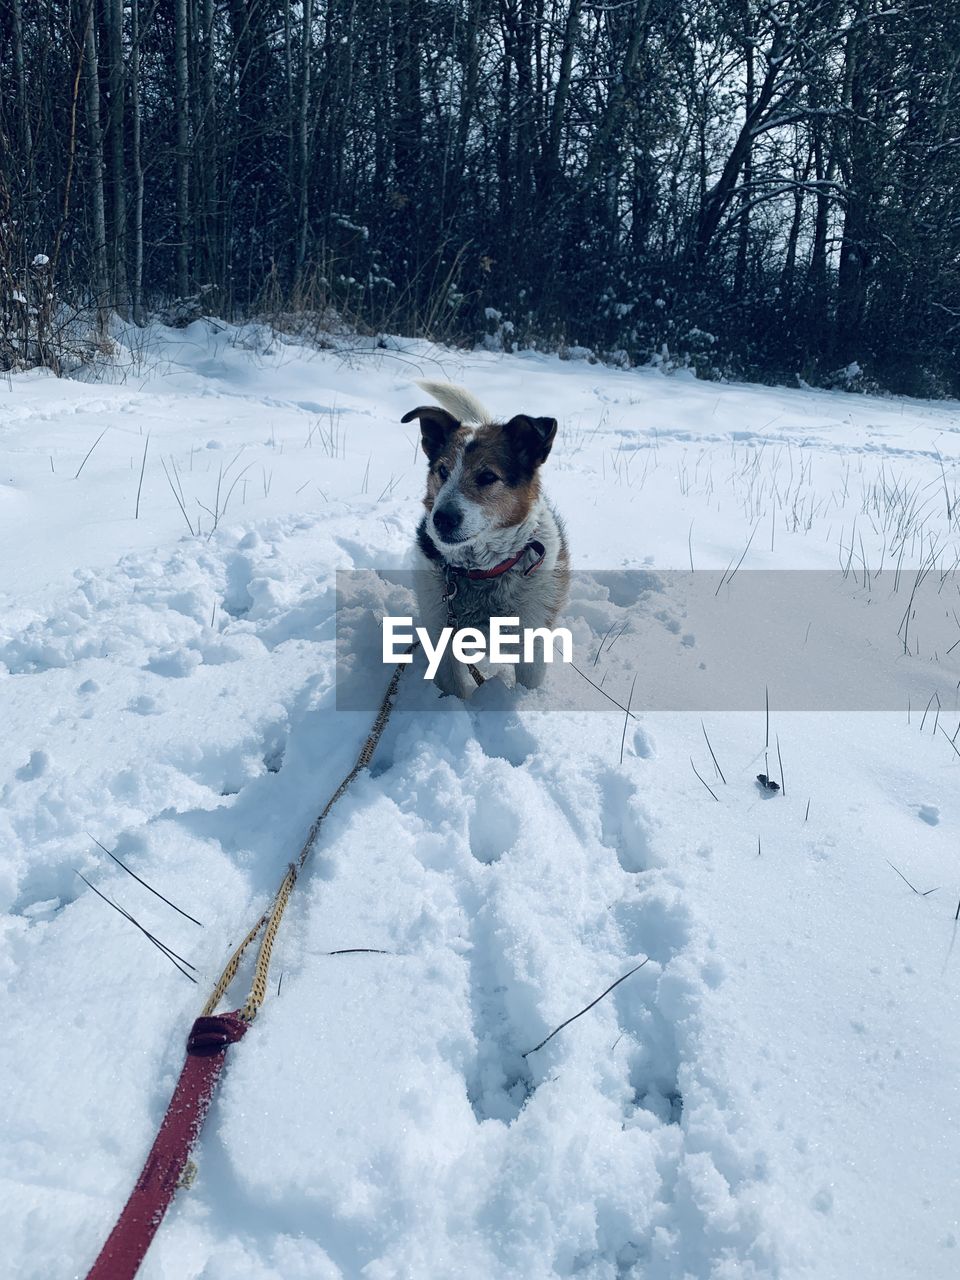 winter, snow, cold temperature, canine, dog, one animal, pet, domestic animals, mammal, animal themes, animal, tree, nature, plant, land, white, day, vehicle, no people, environment, beauty in nature, field, scenics - nature, outdoors, frozen, forest, clothing